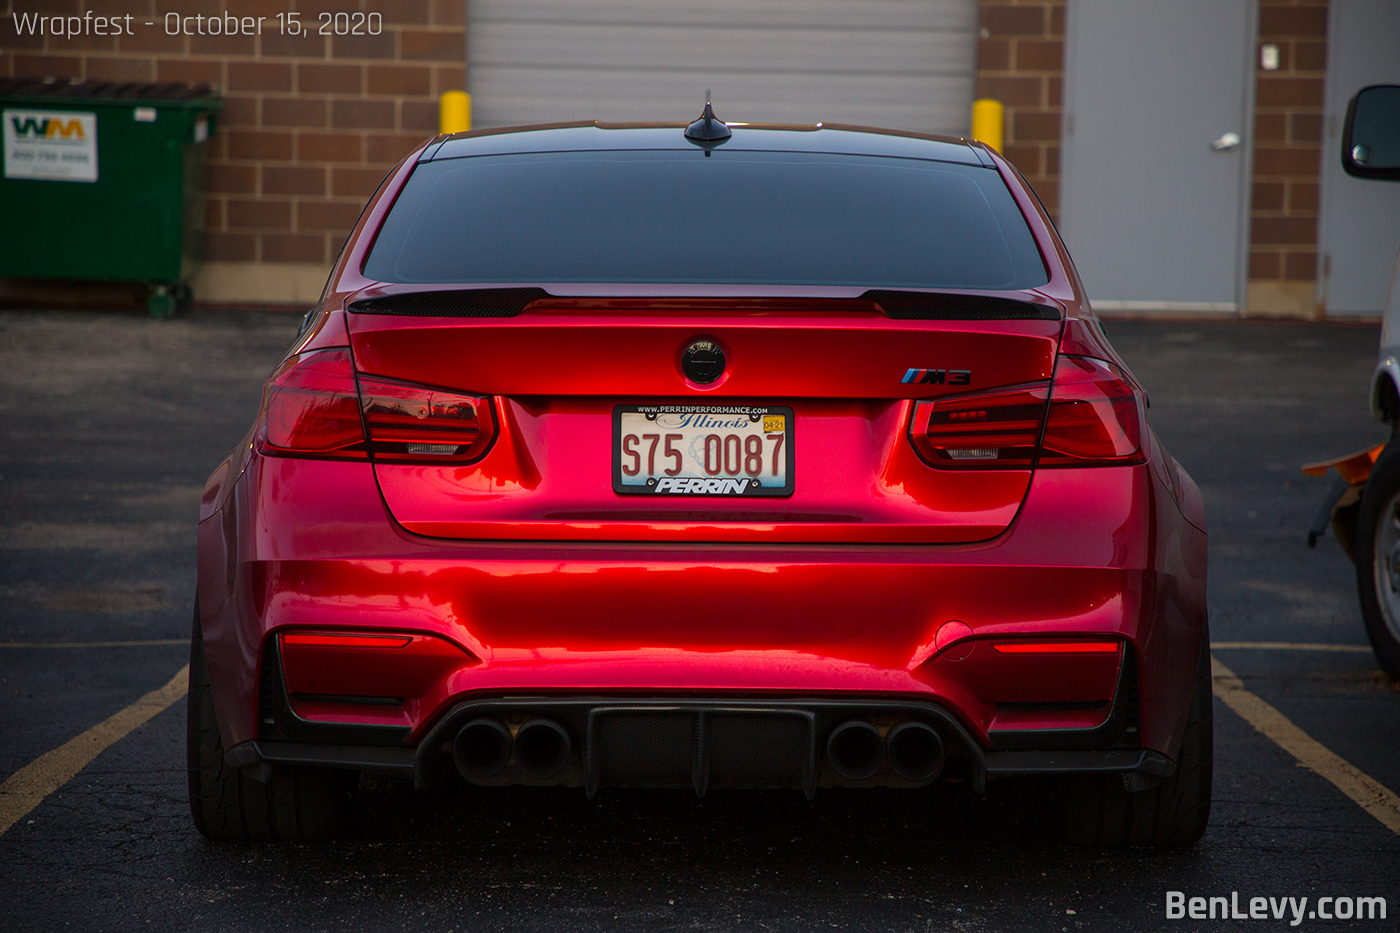 Tails of a red F80 BMW M3